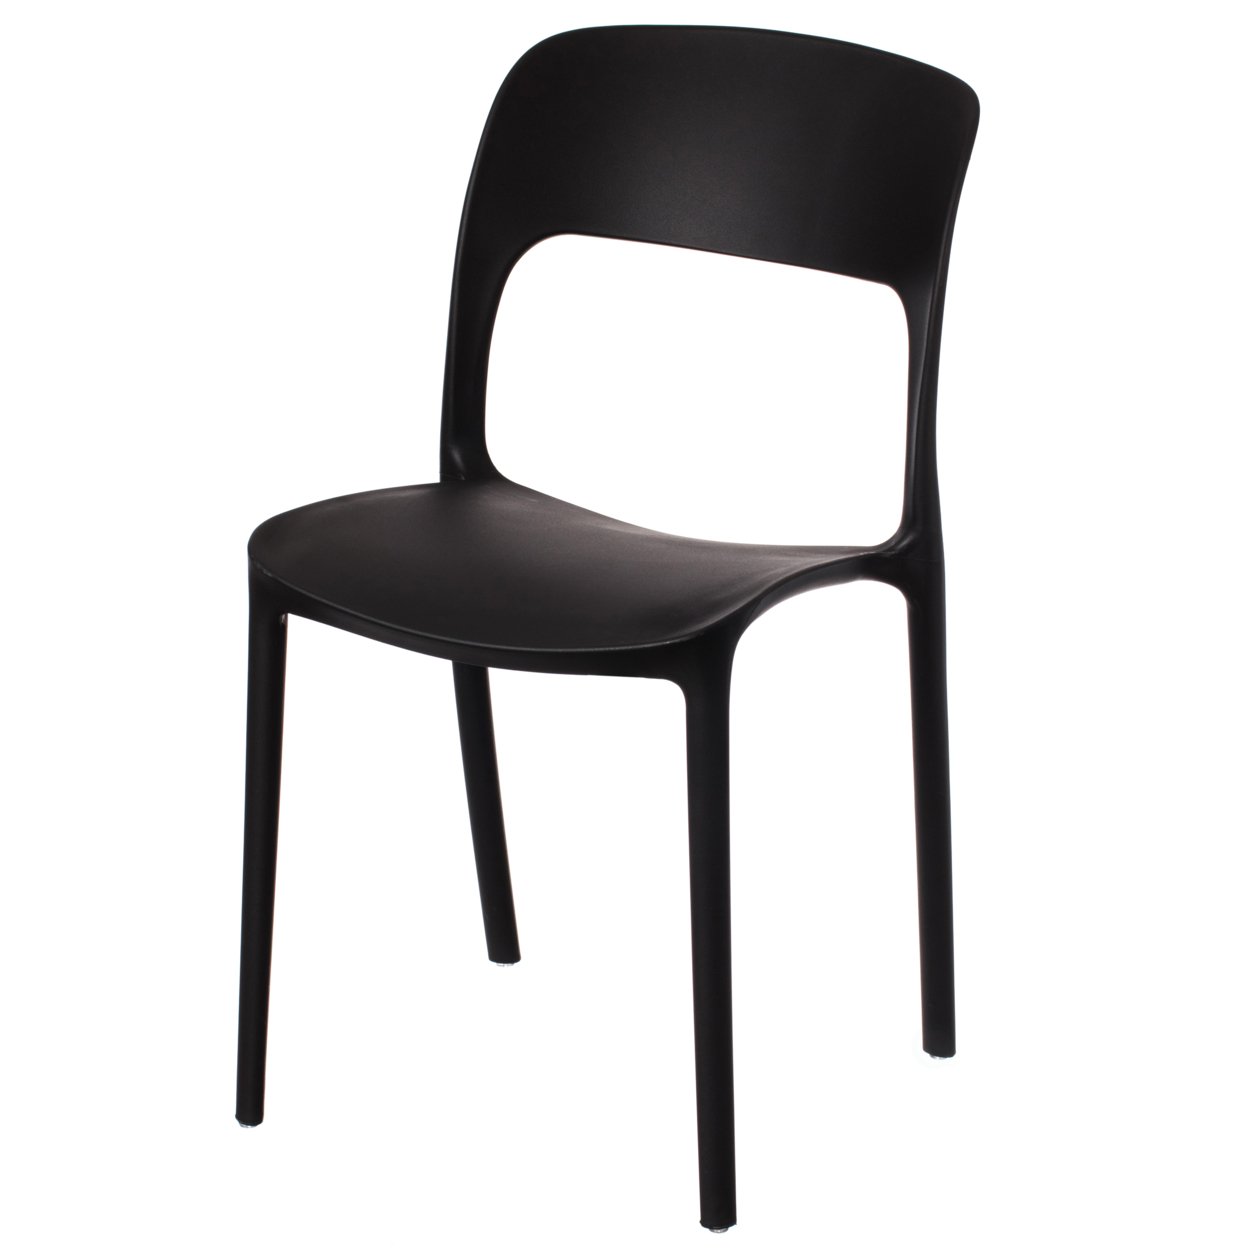 Modern Plastic Outdoor Dining Chair With Open Curved Back - Single Yellow